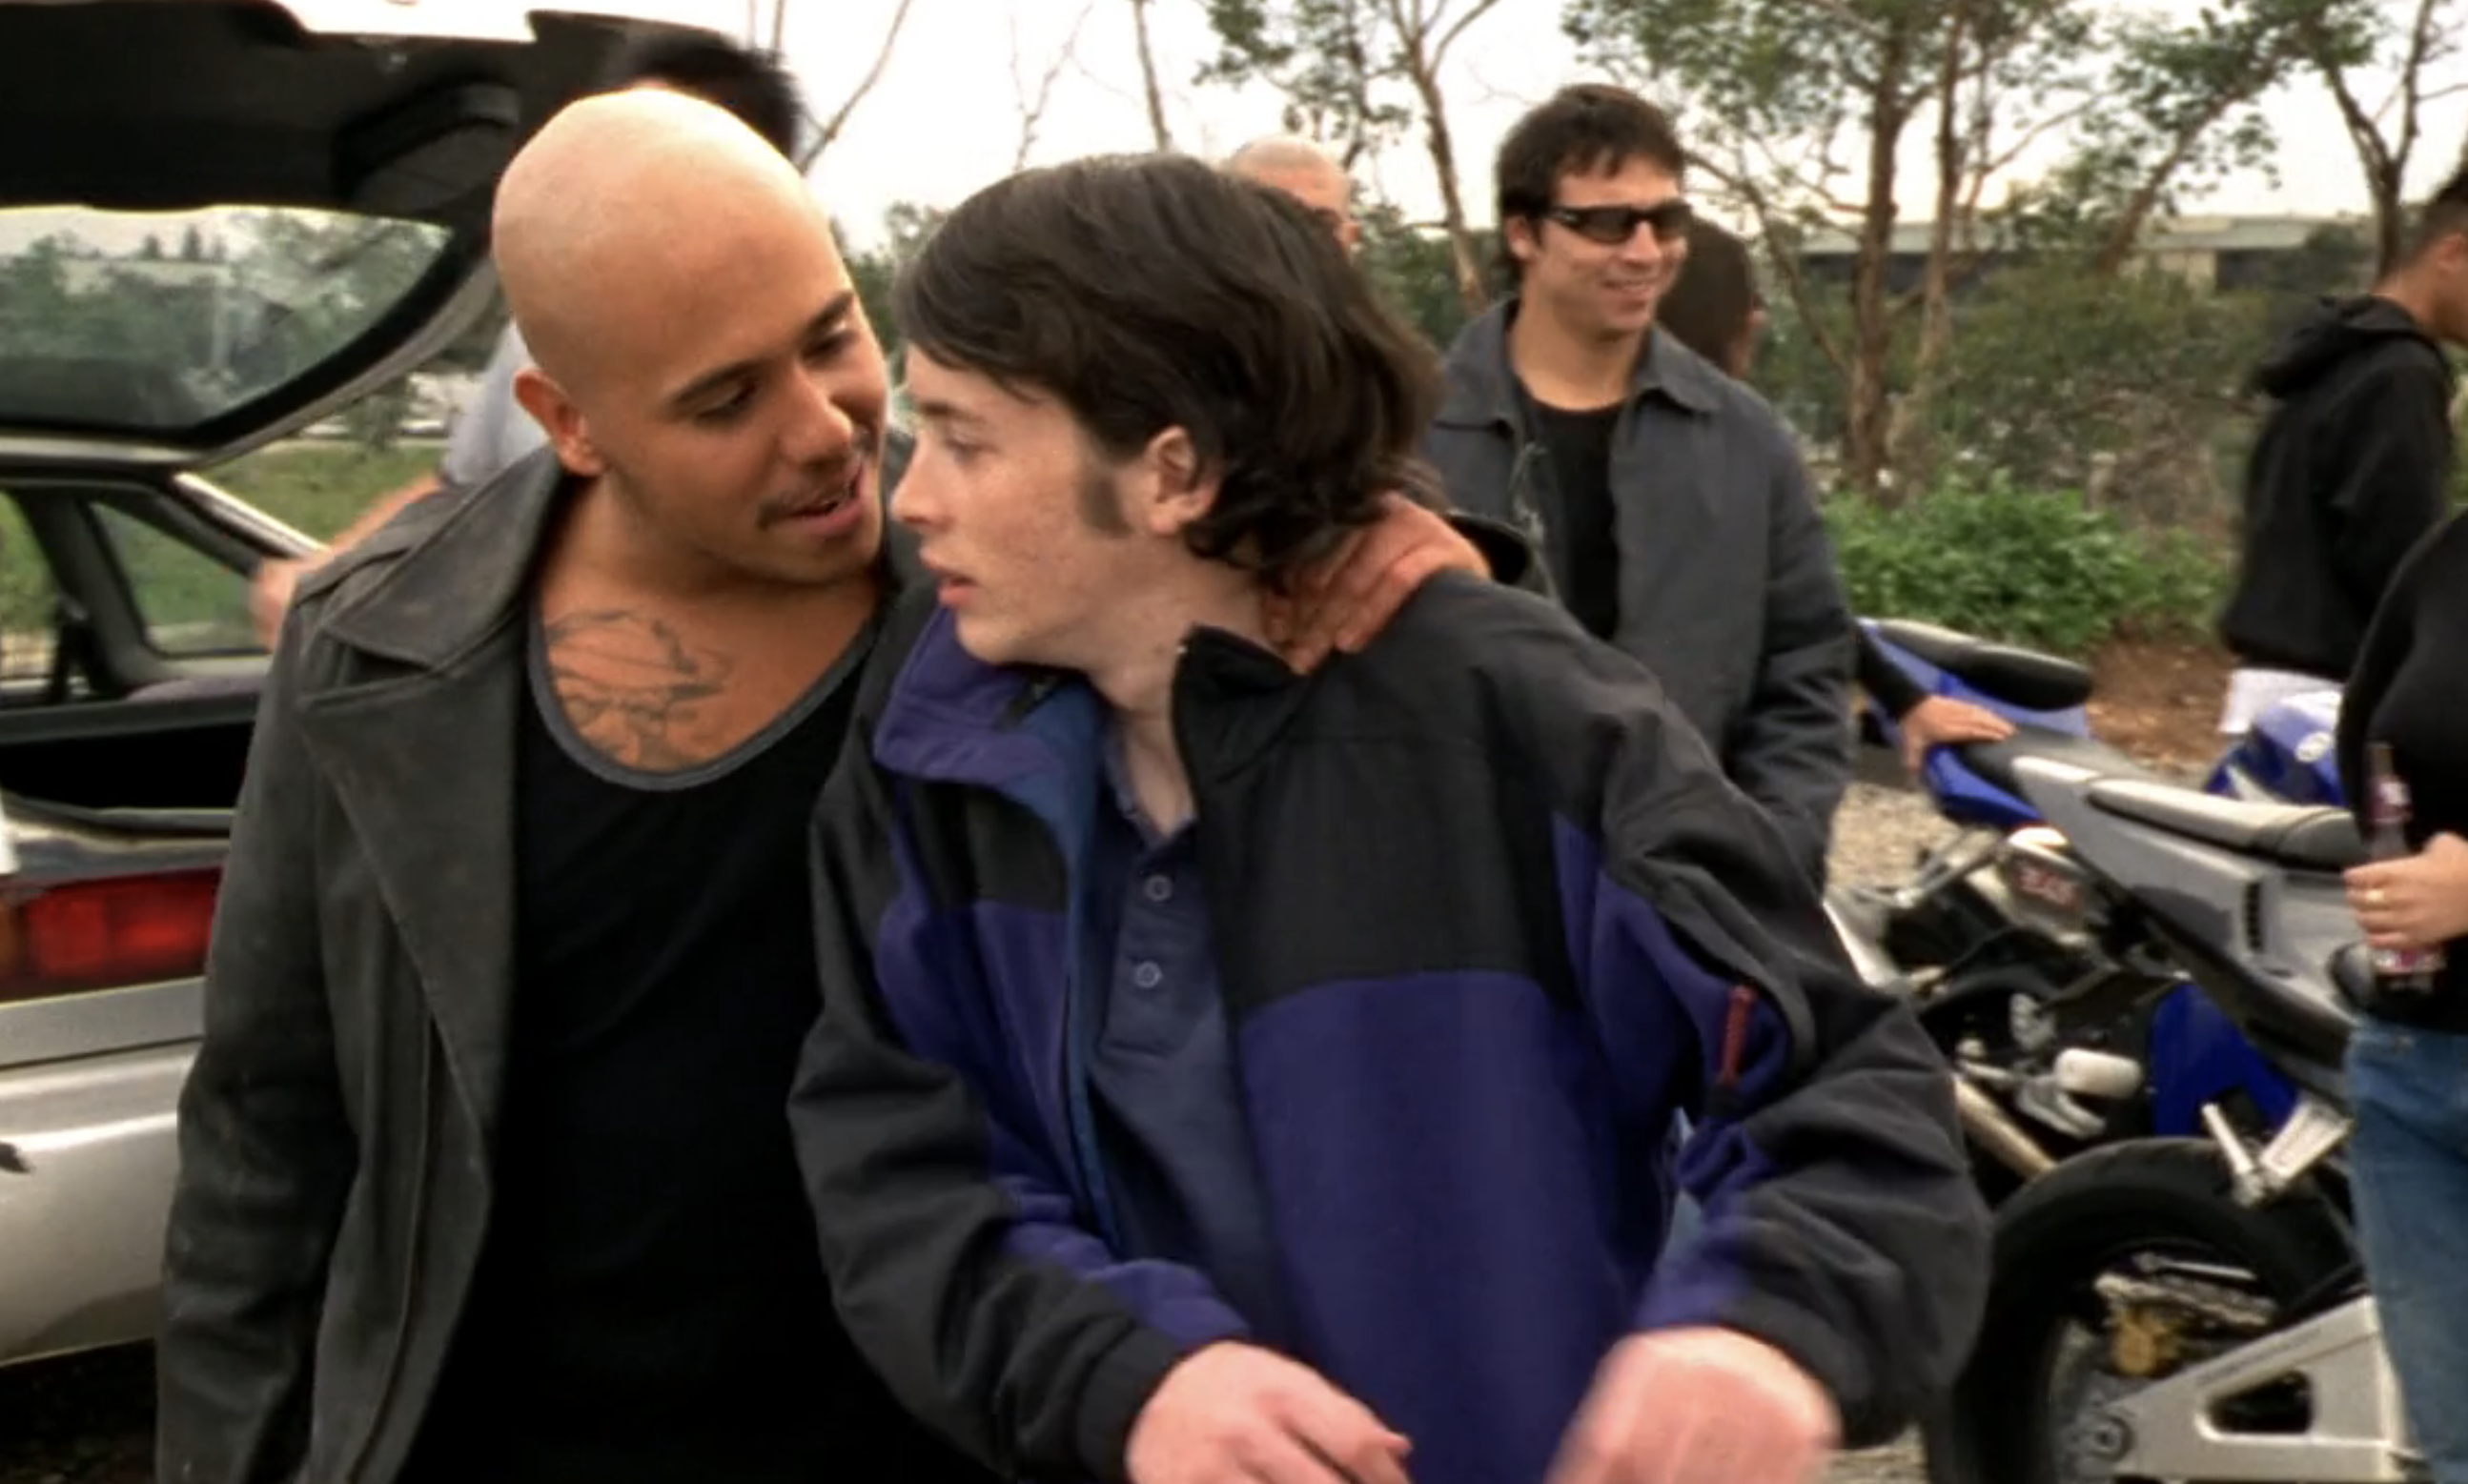 Screenshot from S1E16 of Veronica Mars. Weevil is standing in the foreground with his hand on the scruff of Wilson's neck, looking menacingly at him